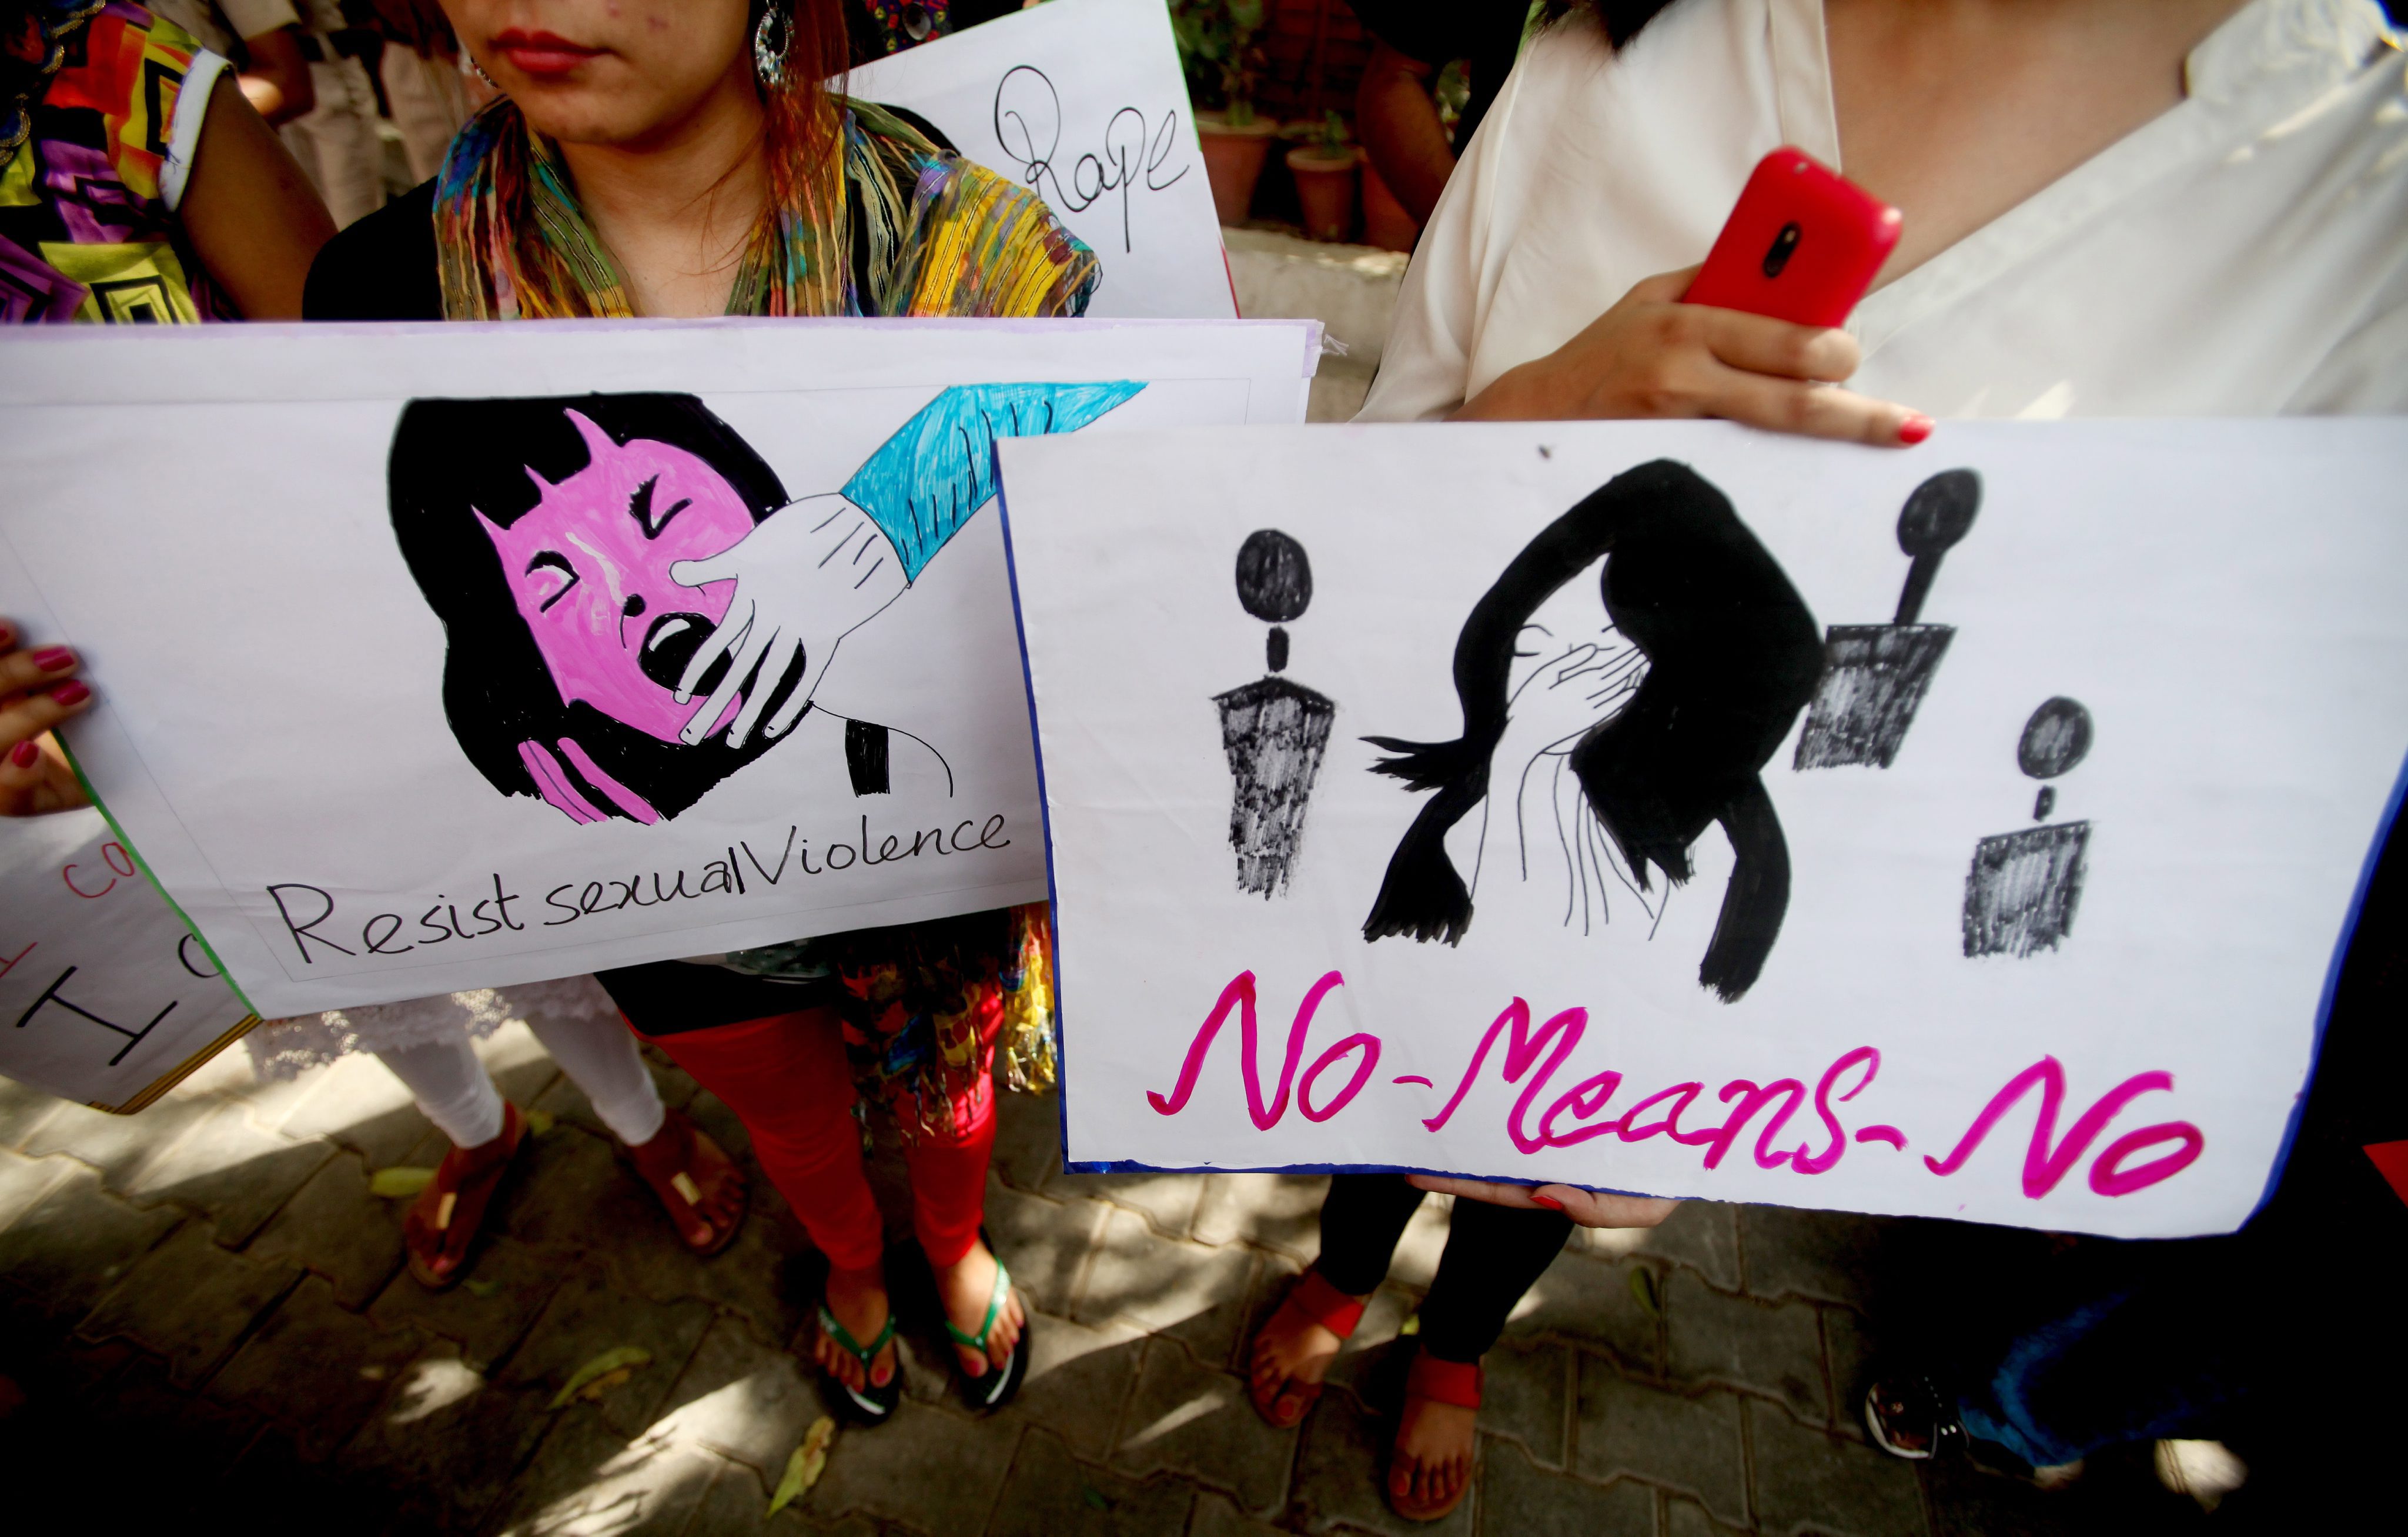 Media coverage of rape cases in India helped to galvanise public demand for tougher law enforcement. Photo: EPA